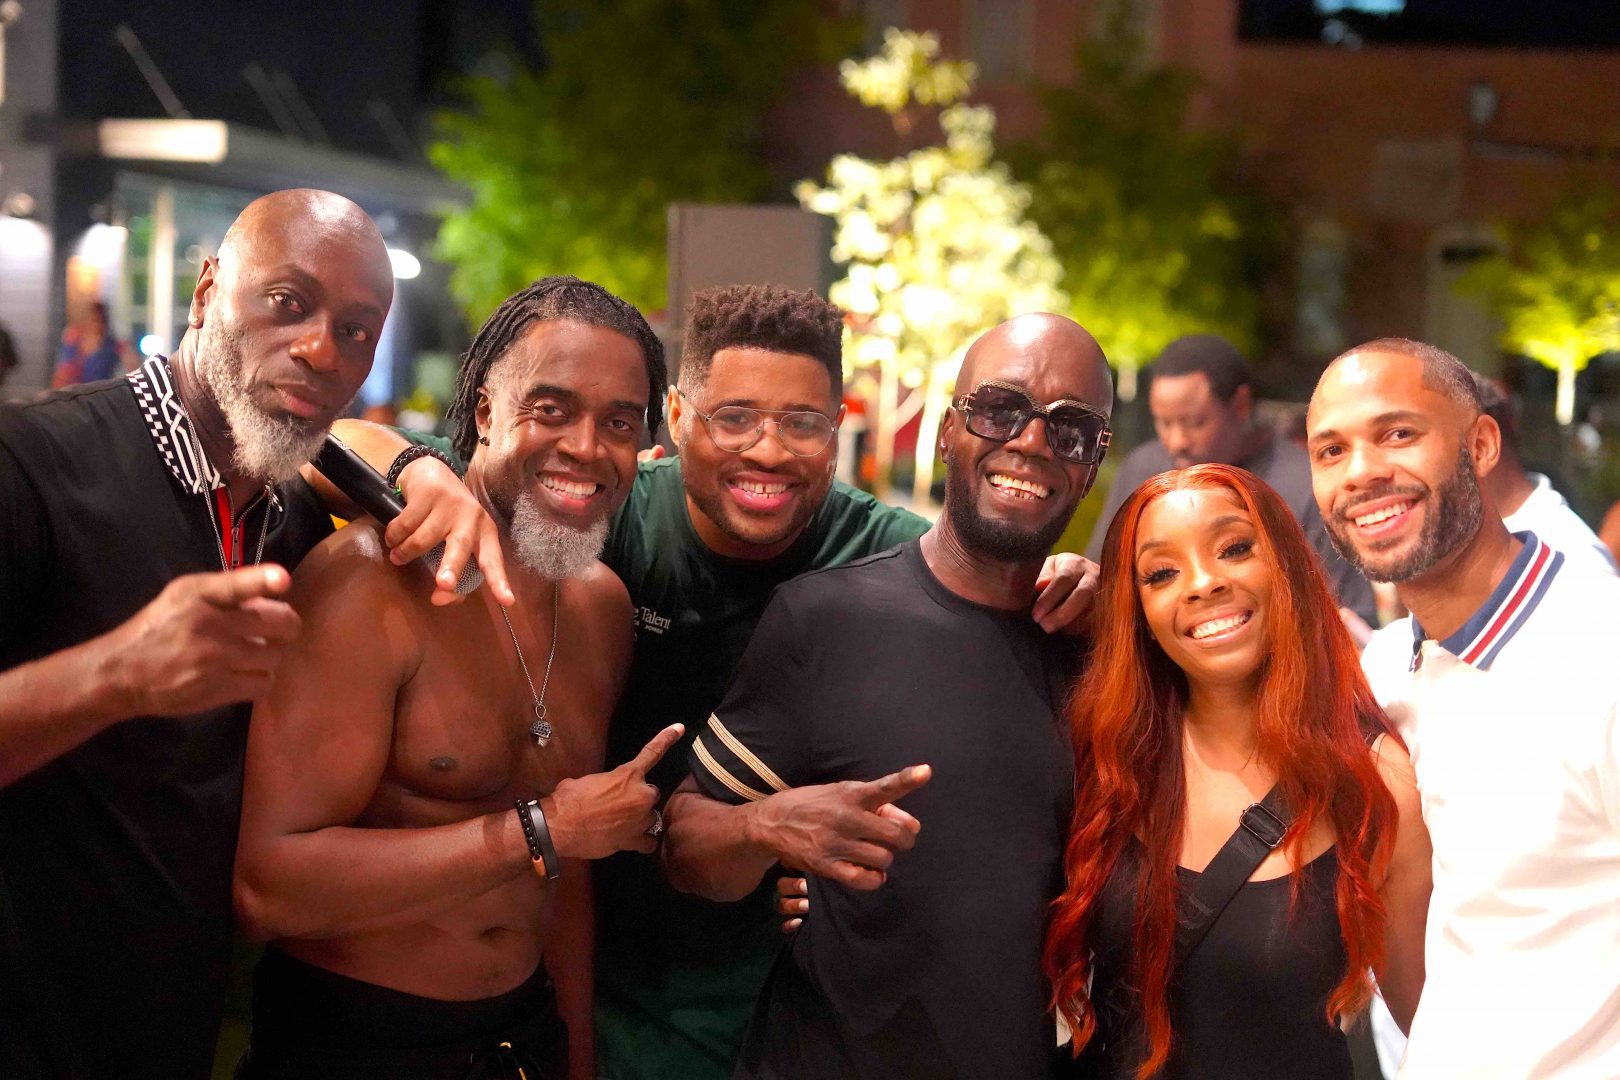 Singer Aaron Hall celebrates his 58th birthday at Nouveau Bar and Grill